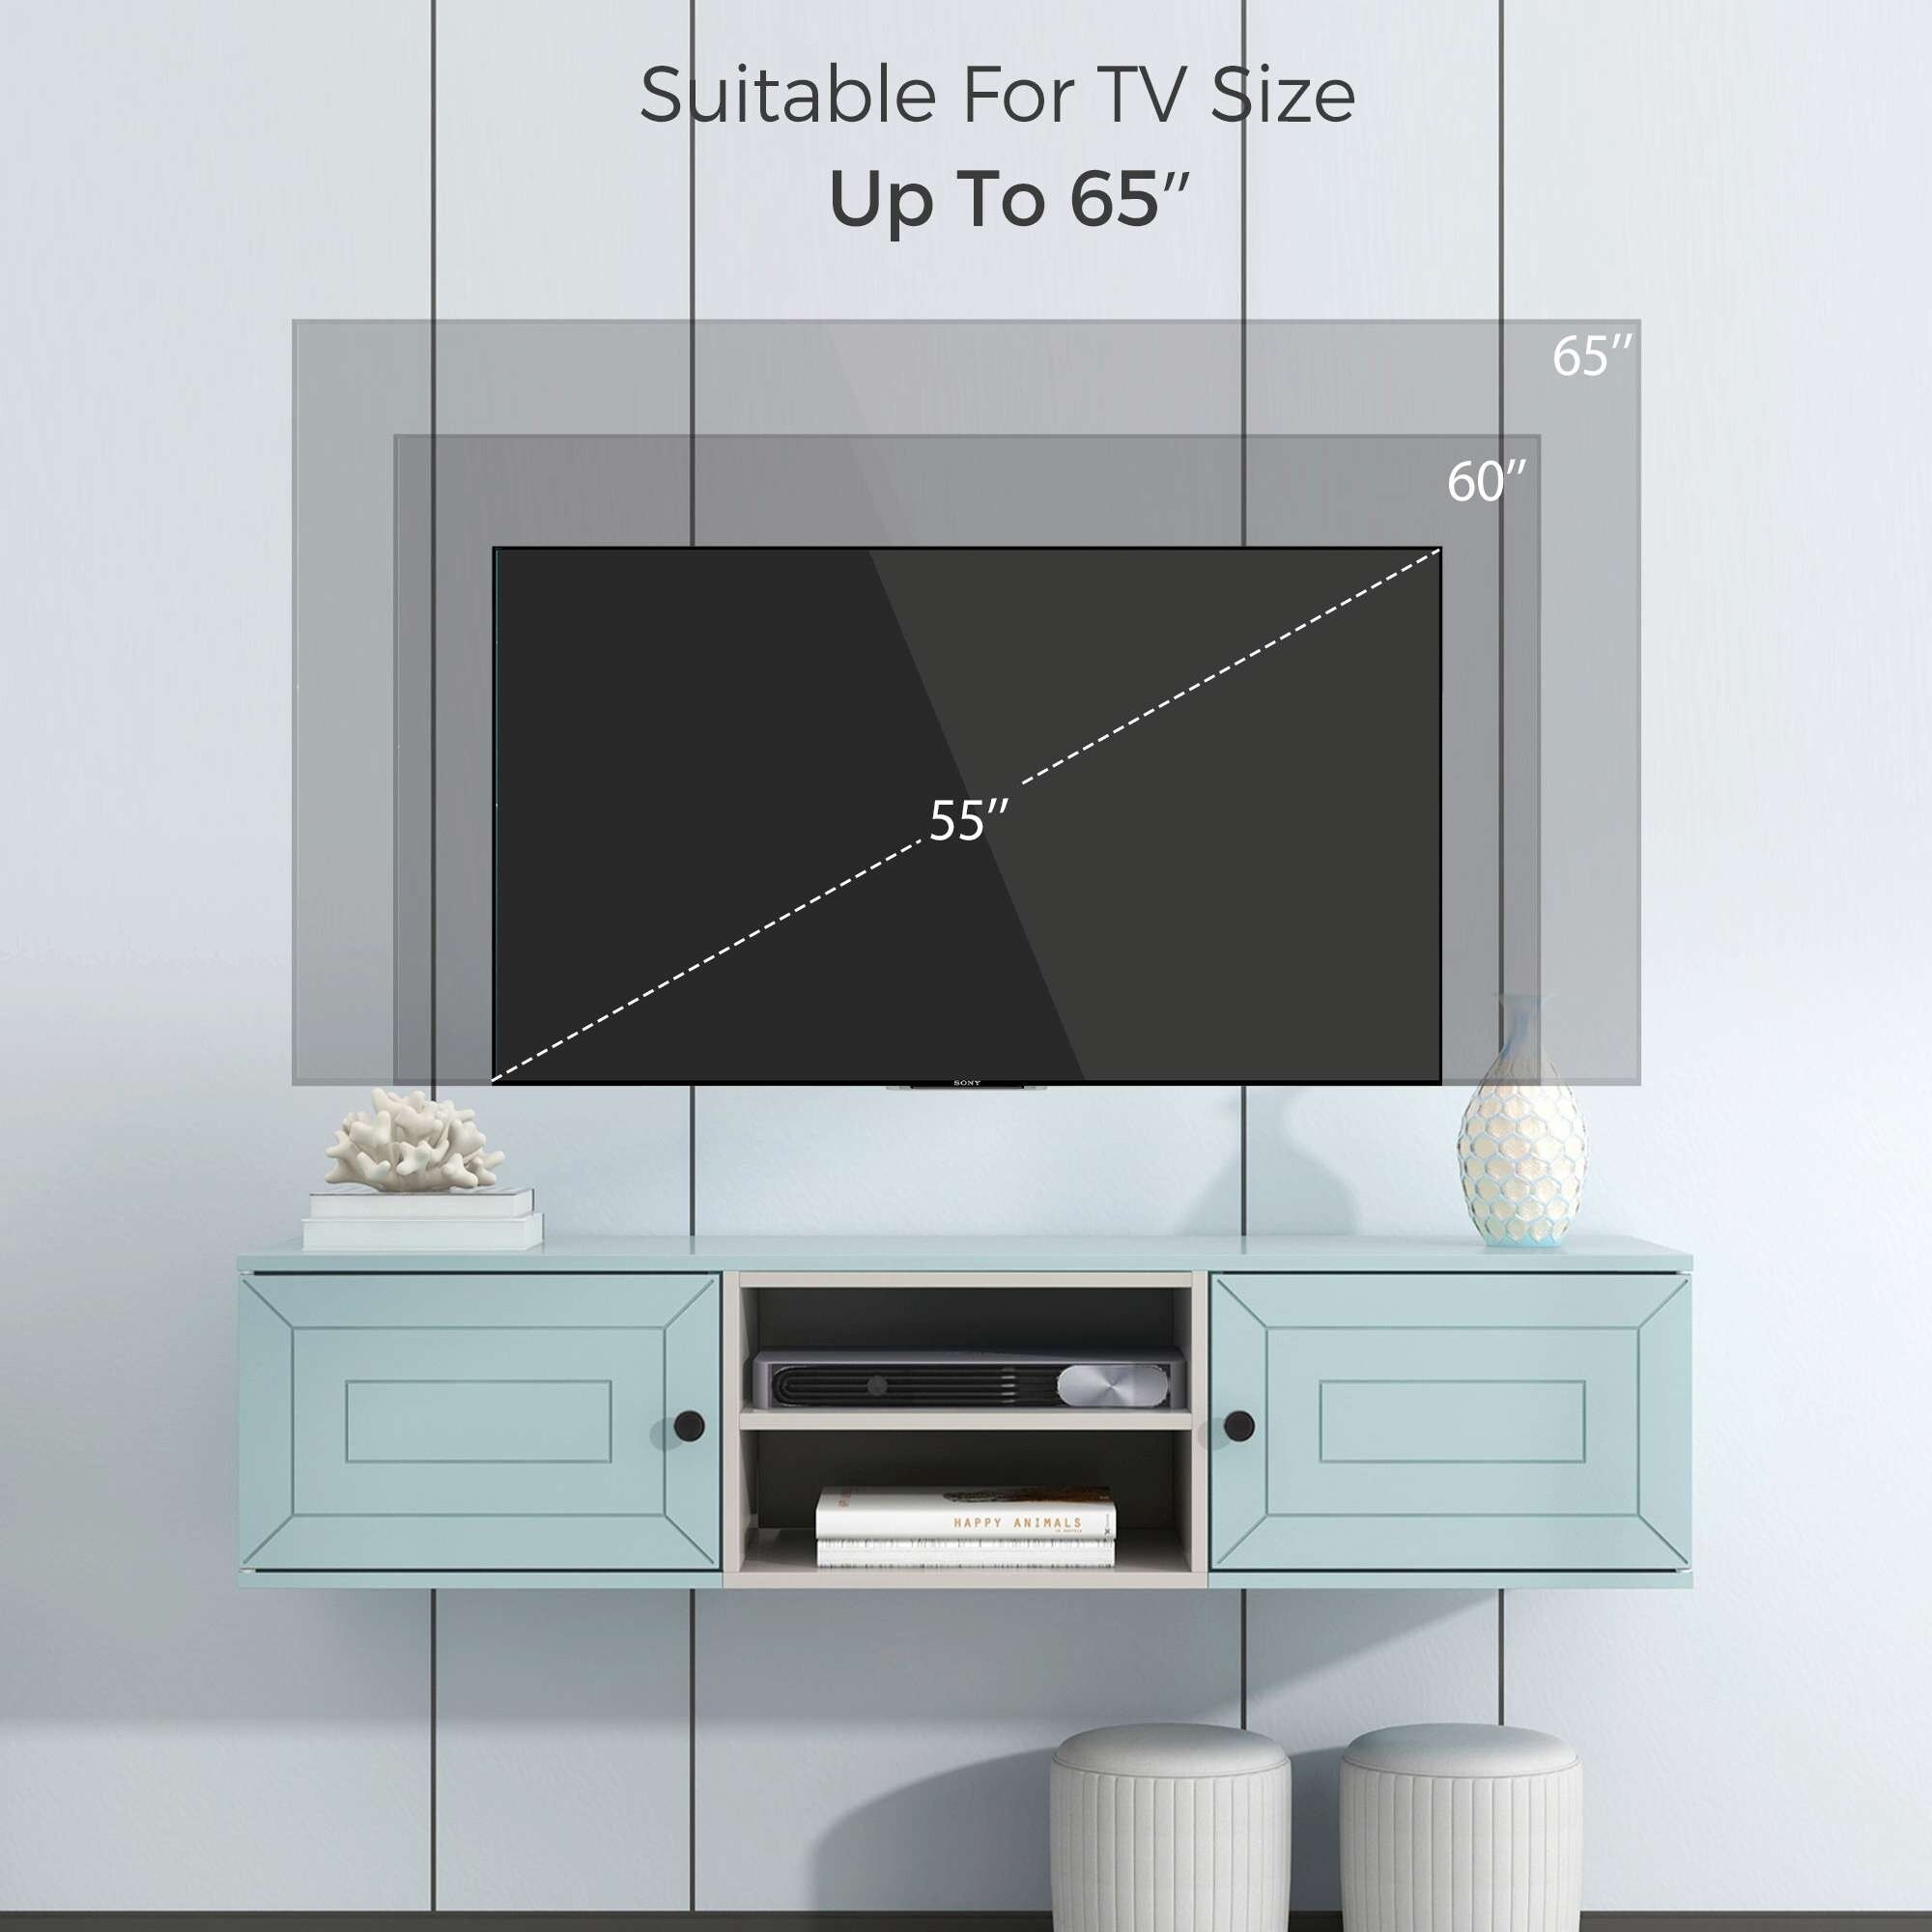 60" Floating TV Stand: Wall-Mounted, Ample Storage, Adjustable Shelves, Magnetic Door, Cable Management